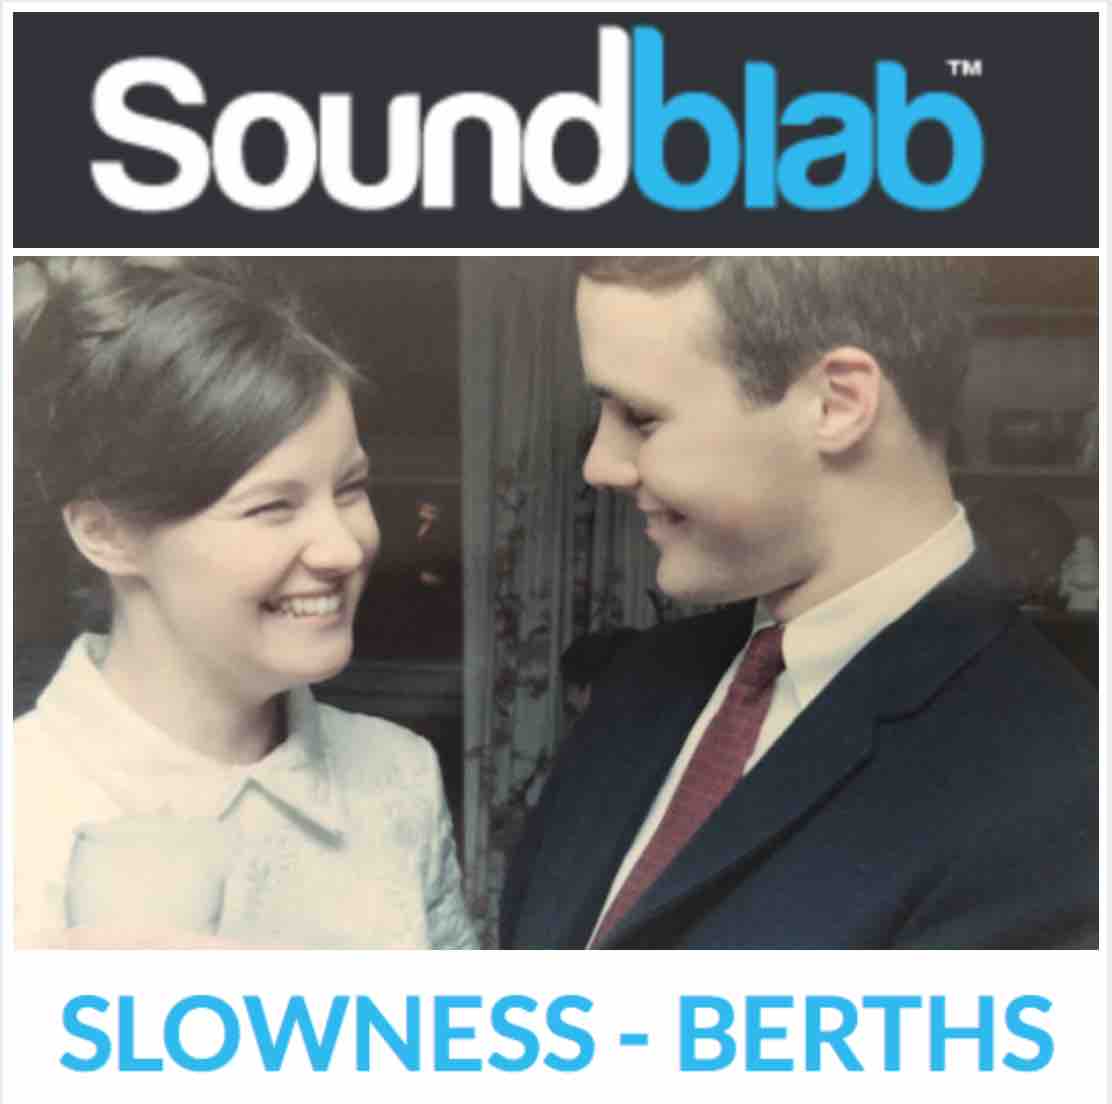 .@Soundblab says the new 'Berths' LP by @SlownessMusic is 'one of the year’s finest releases'. Out Friday via @Schoolkids Records ~ tinyurl.com/yy5km9sk Order the LP bit.ly/Slowness_PreOr… They're at 77% of their target for this release via @Indiegogo - give them a hand?